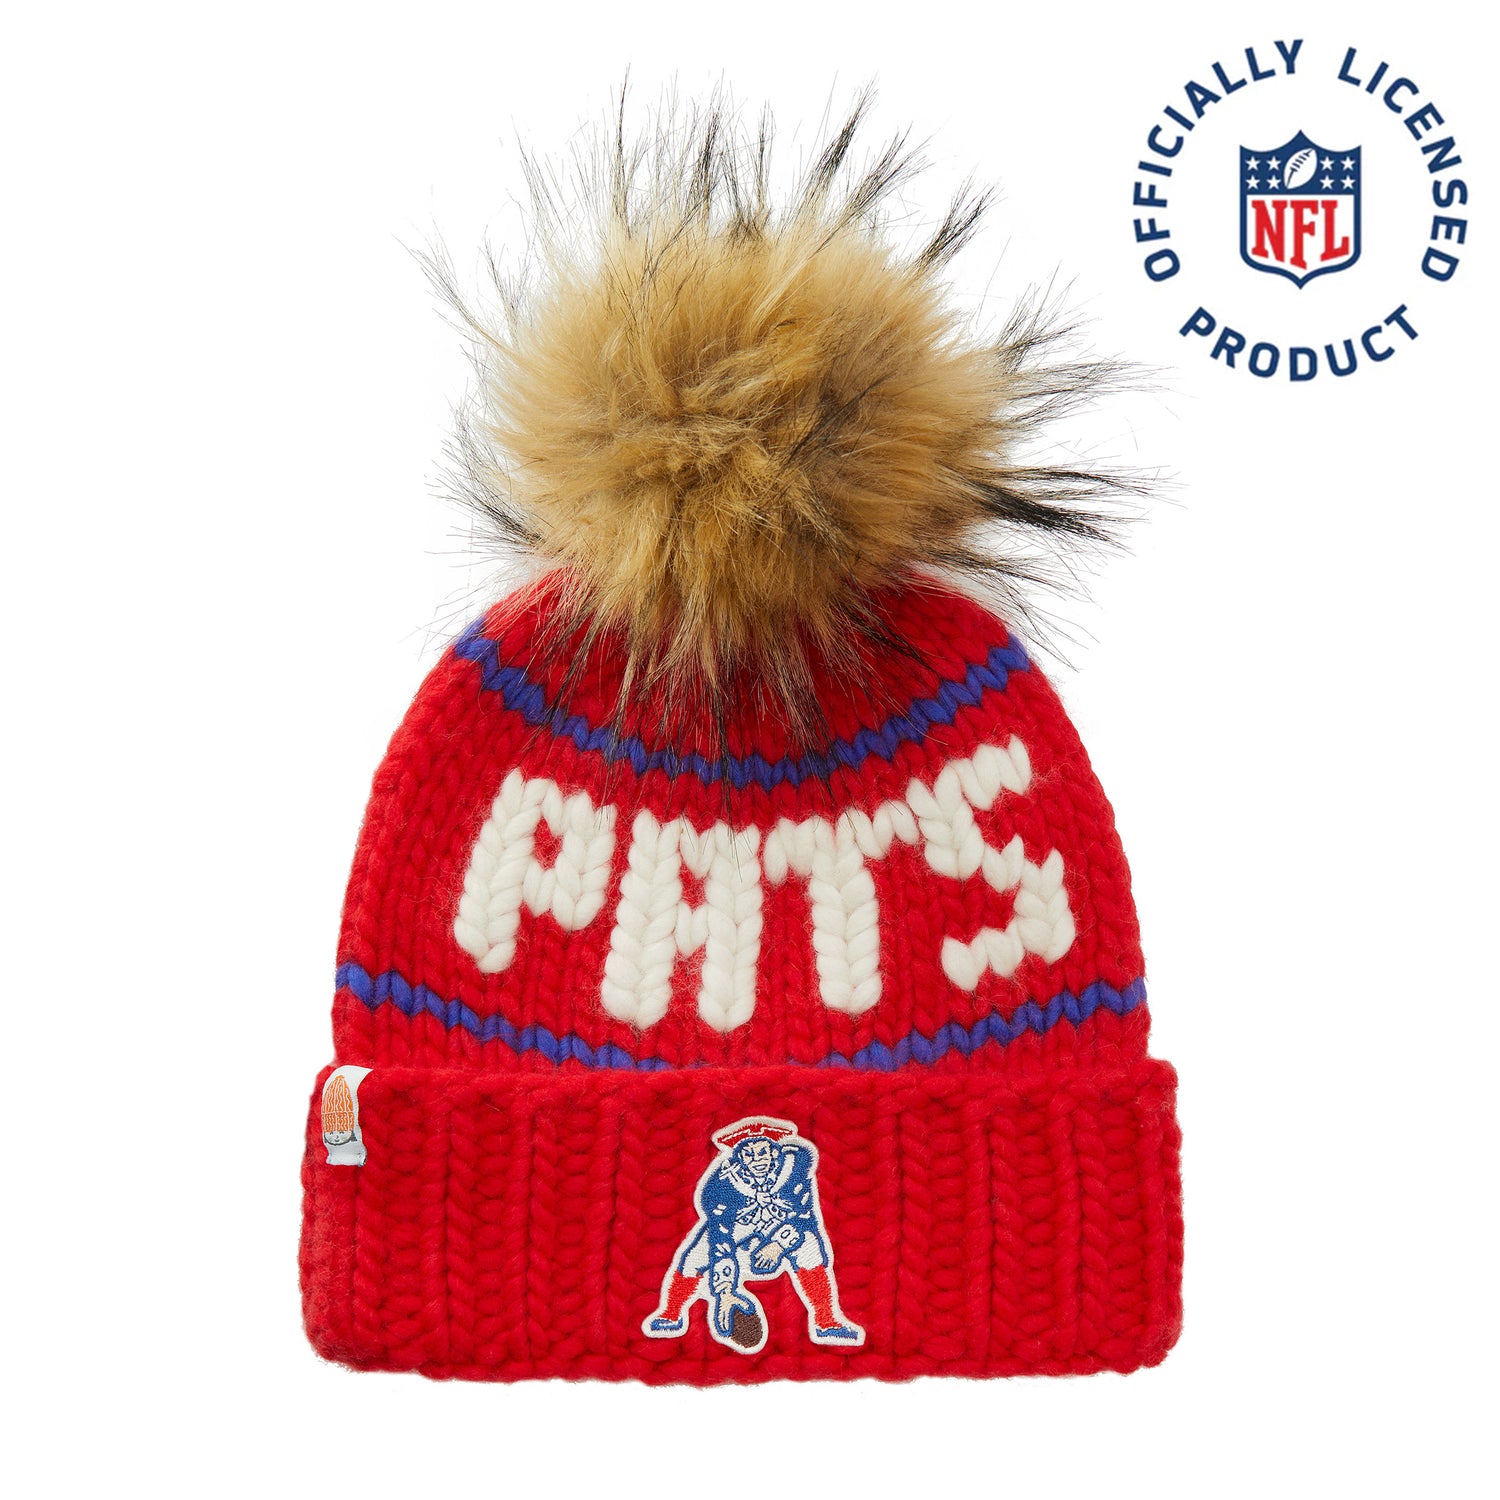 The Retro Pats NFL Beanie with Faux Fur Pom